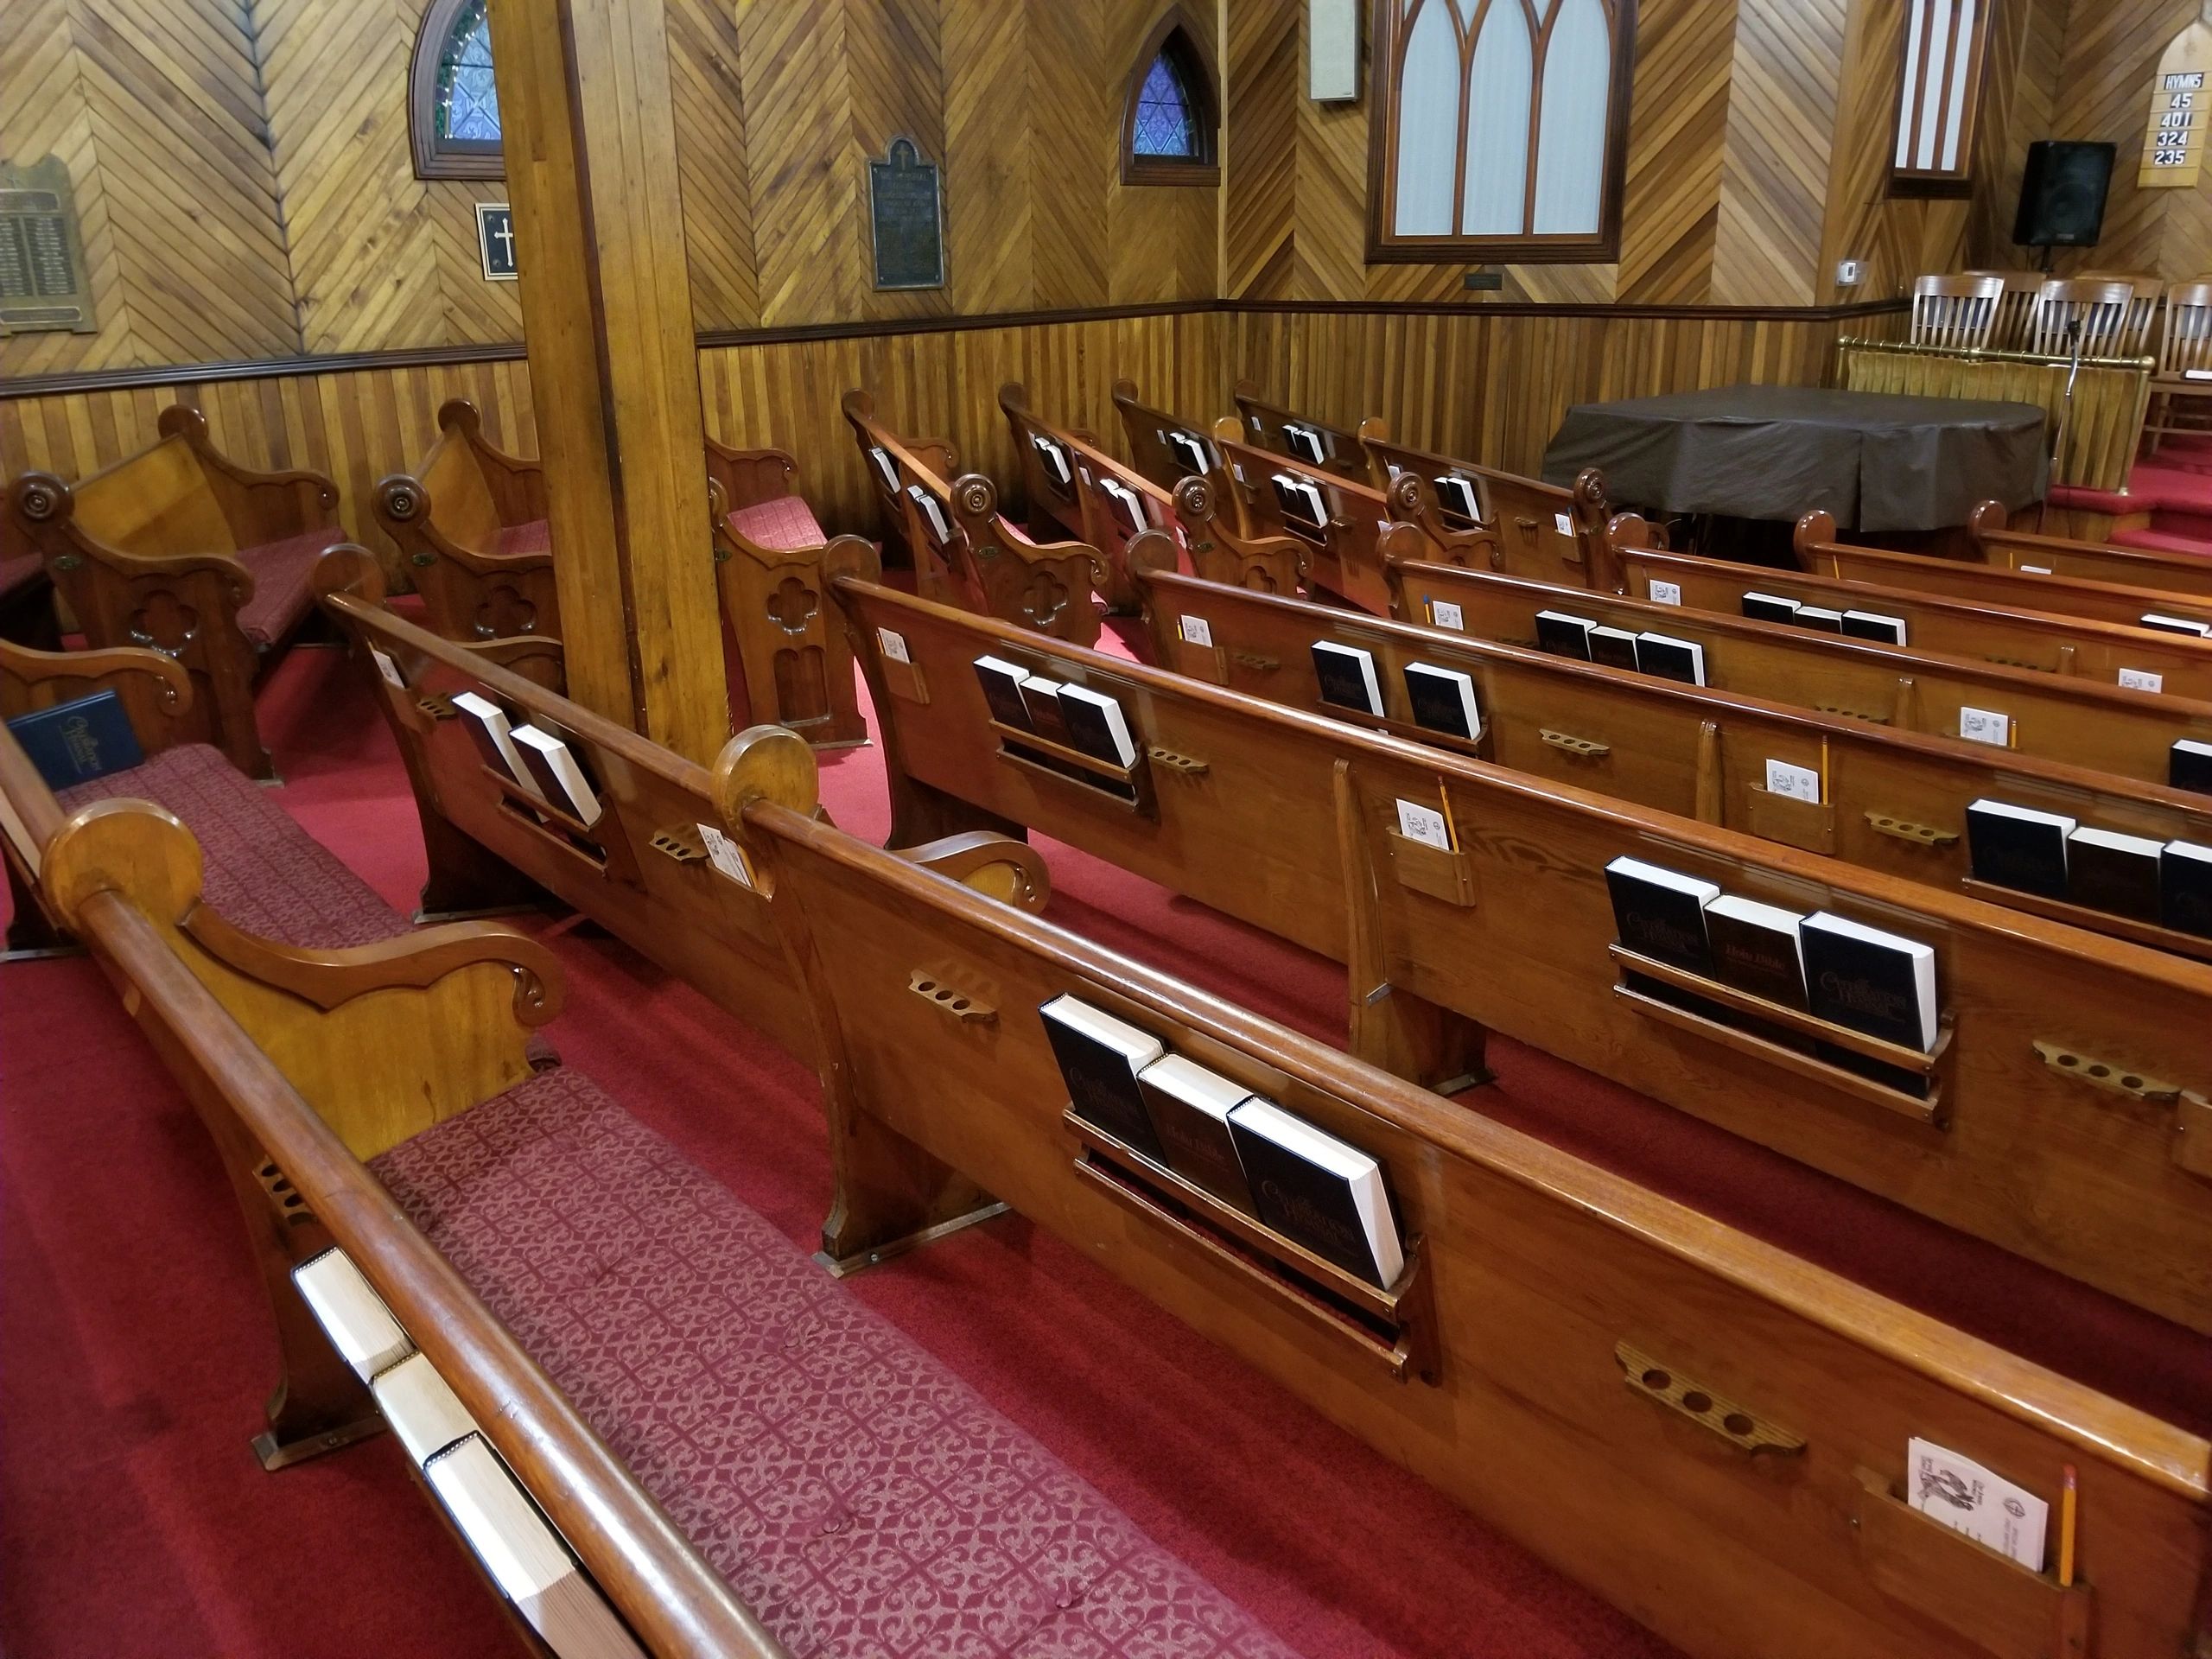 Interior of Sanctuary at First Baptist Church of Troy